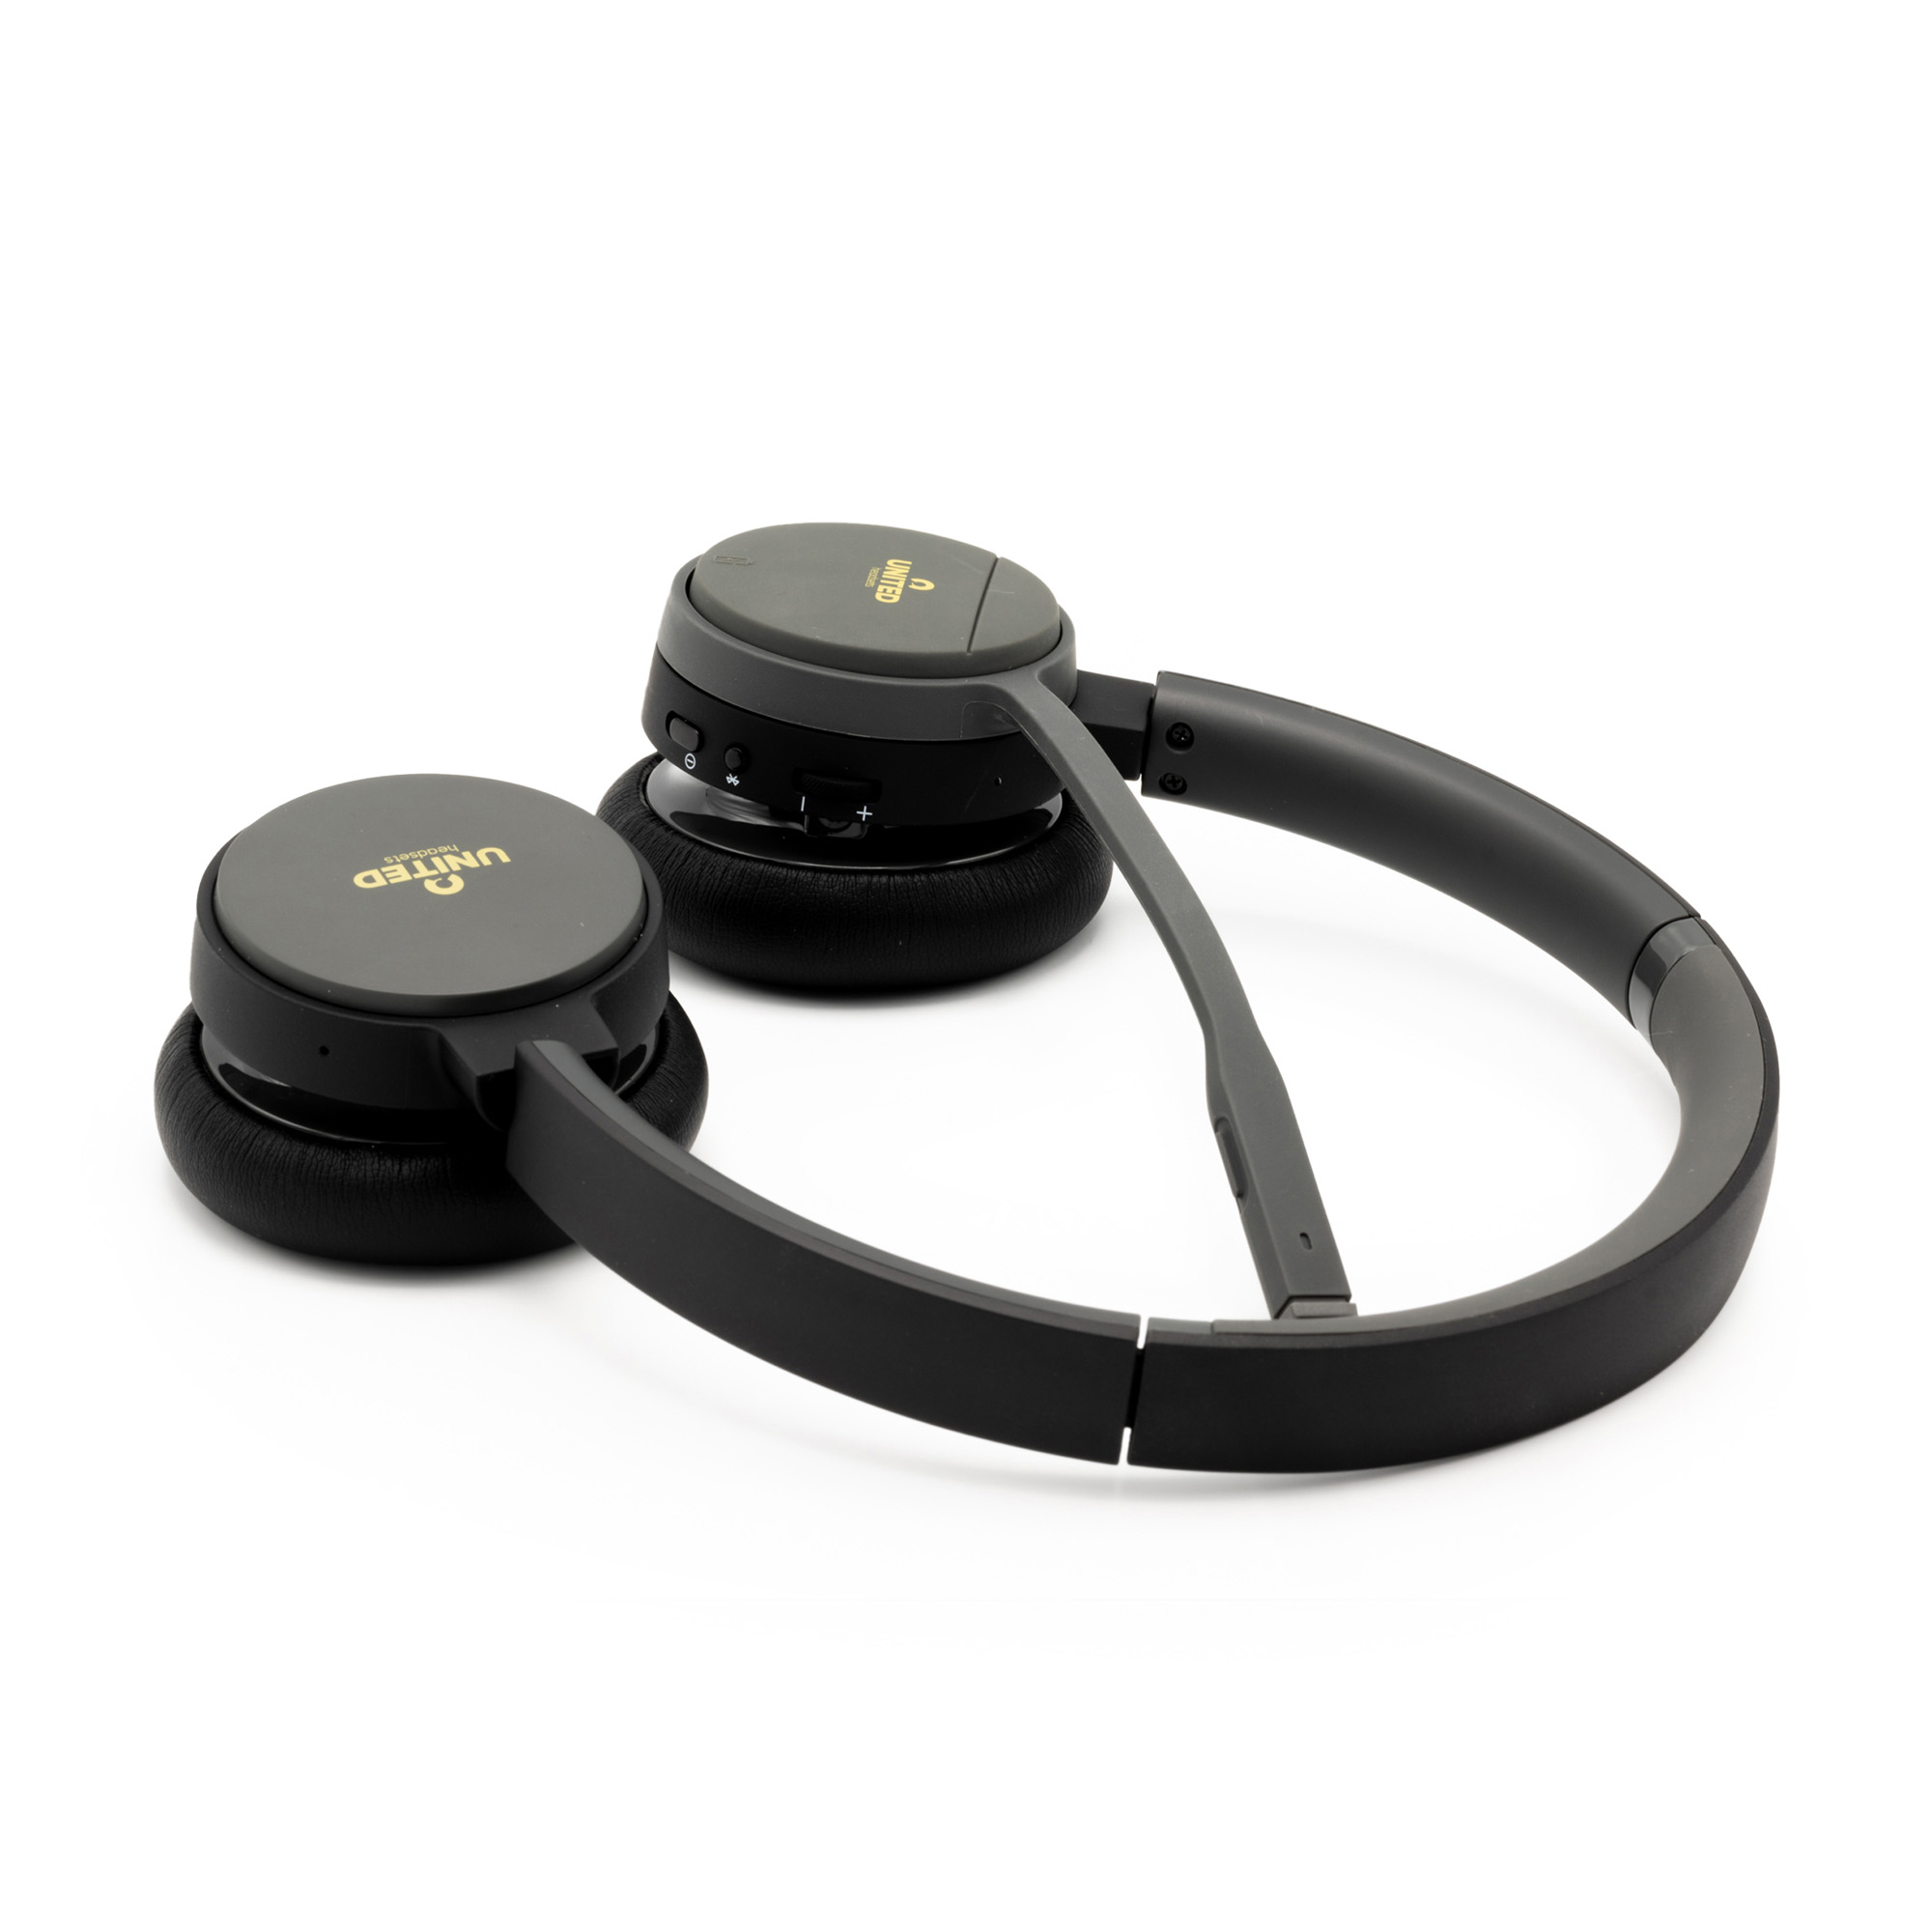 United Headsets Clave Duo NC wireless headset